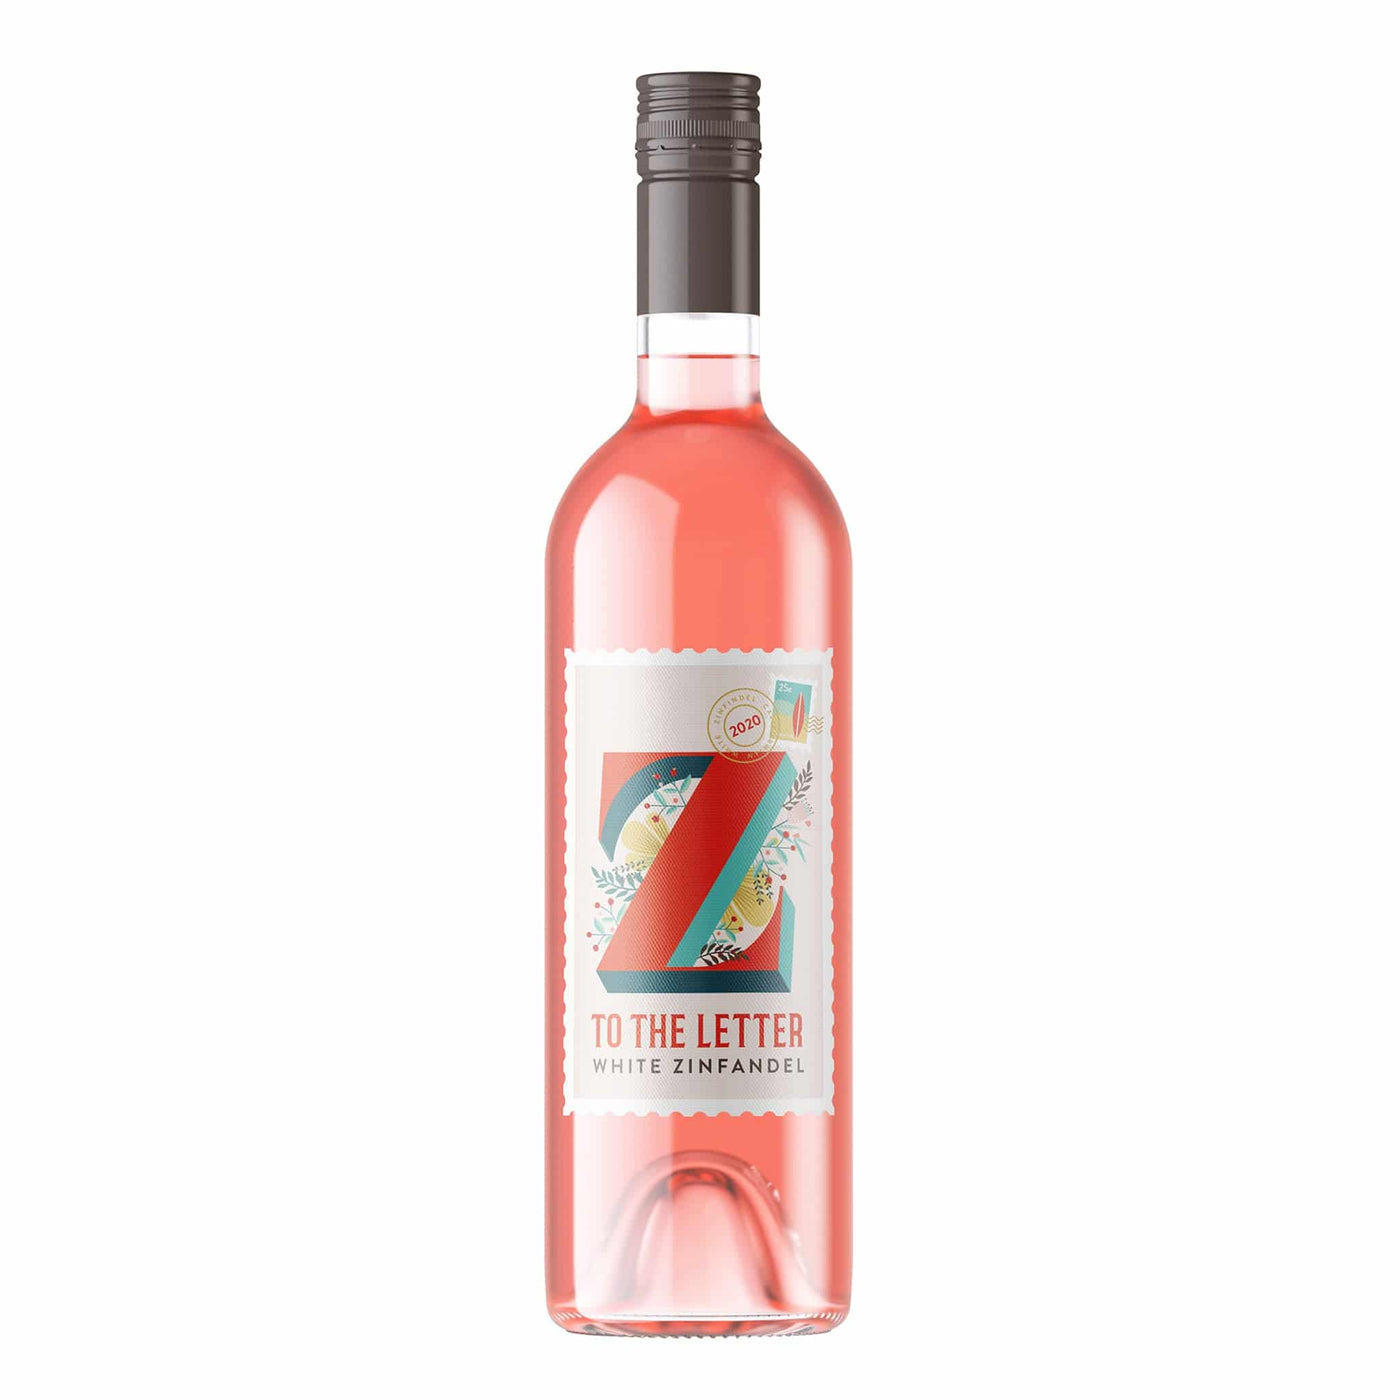 To The Letter White Zinfandel